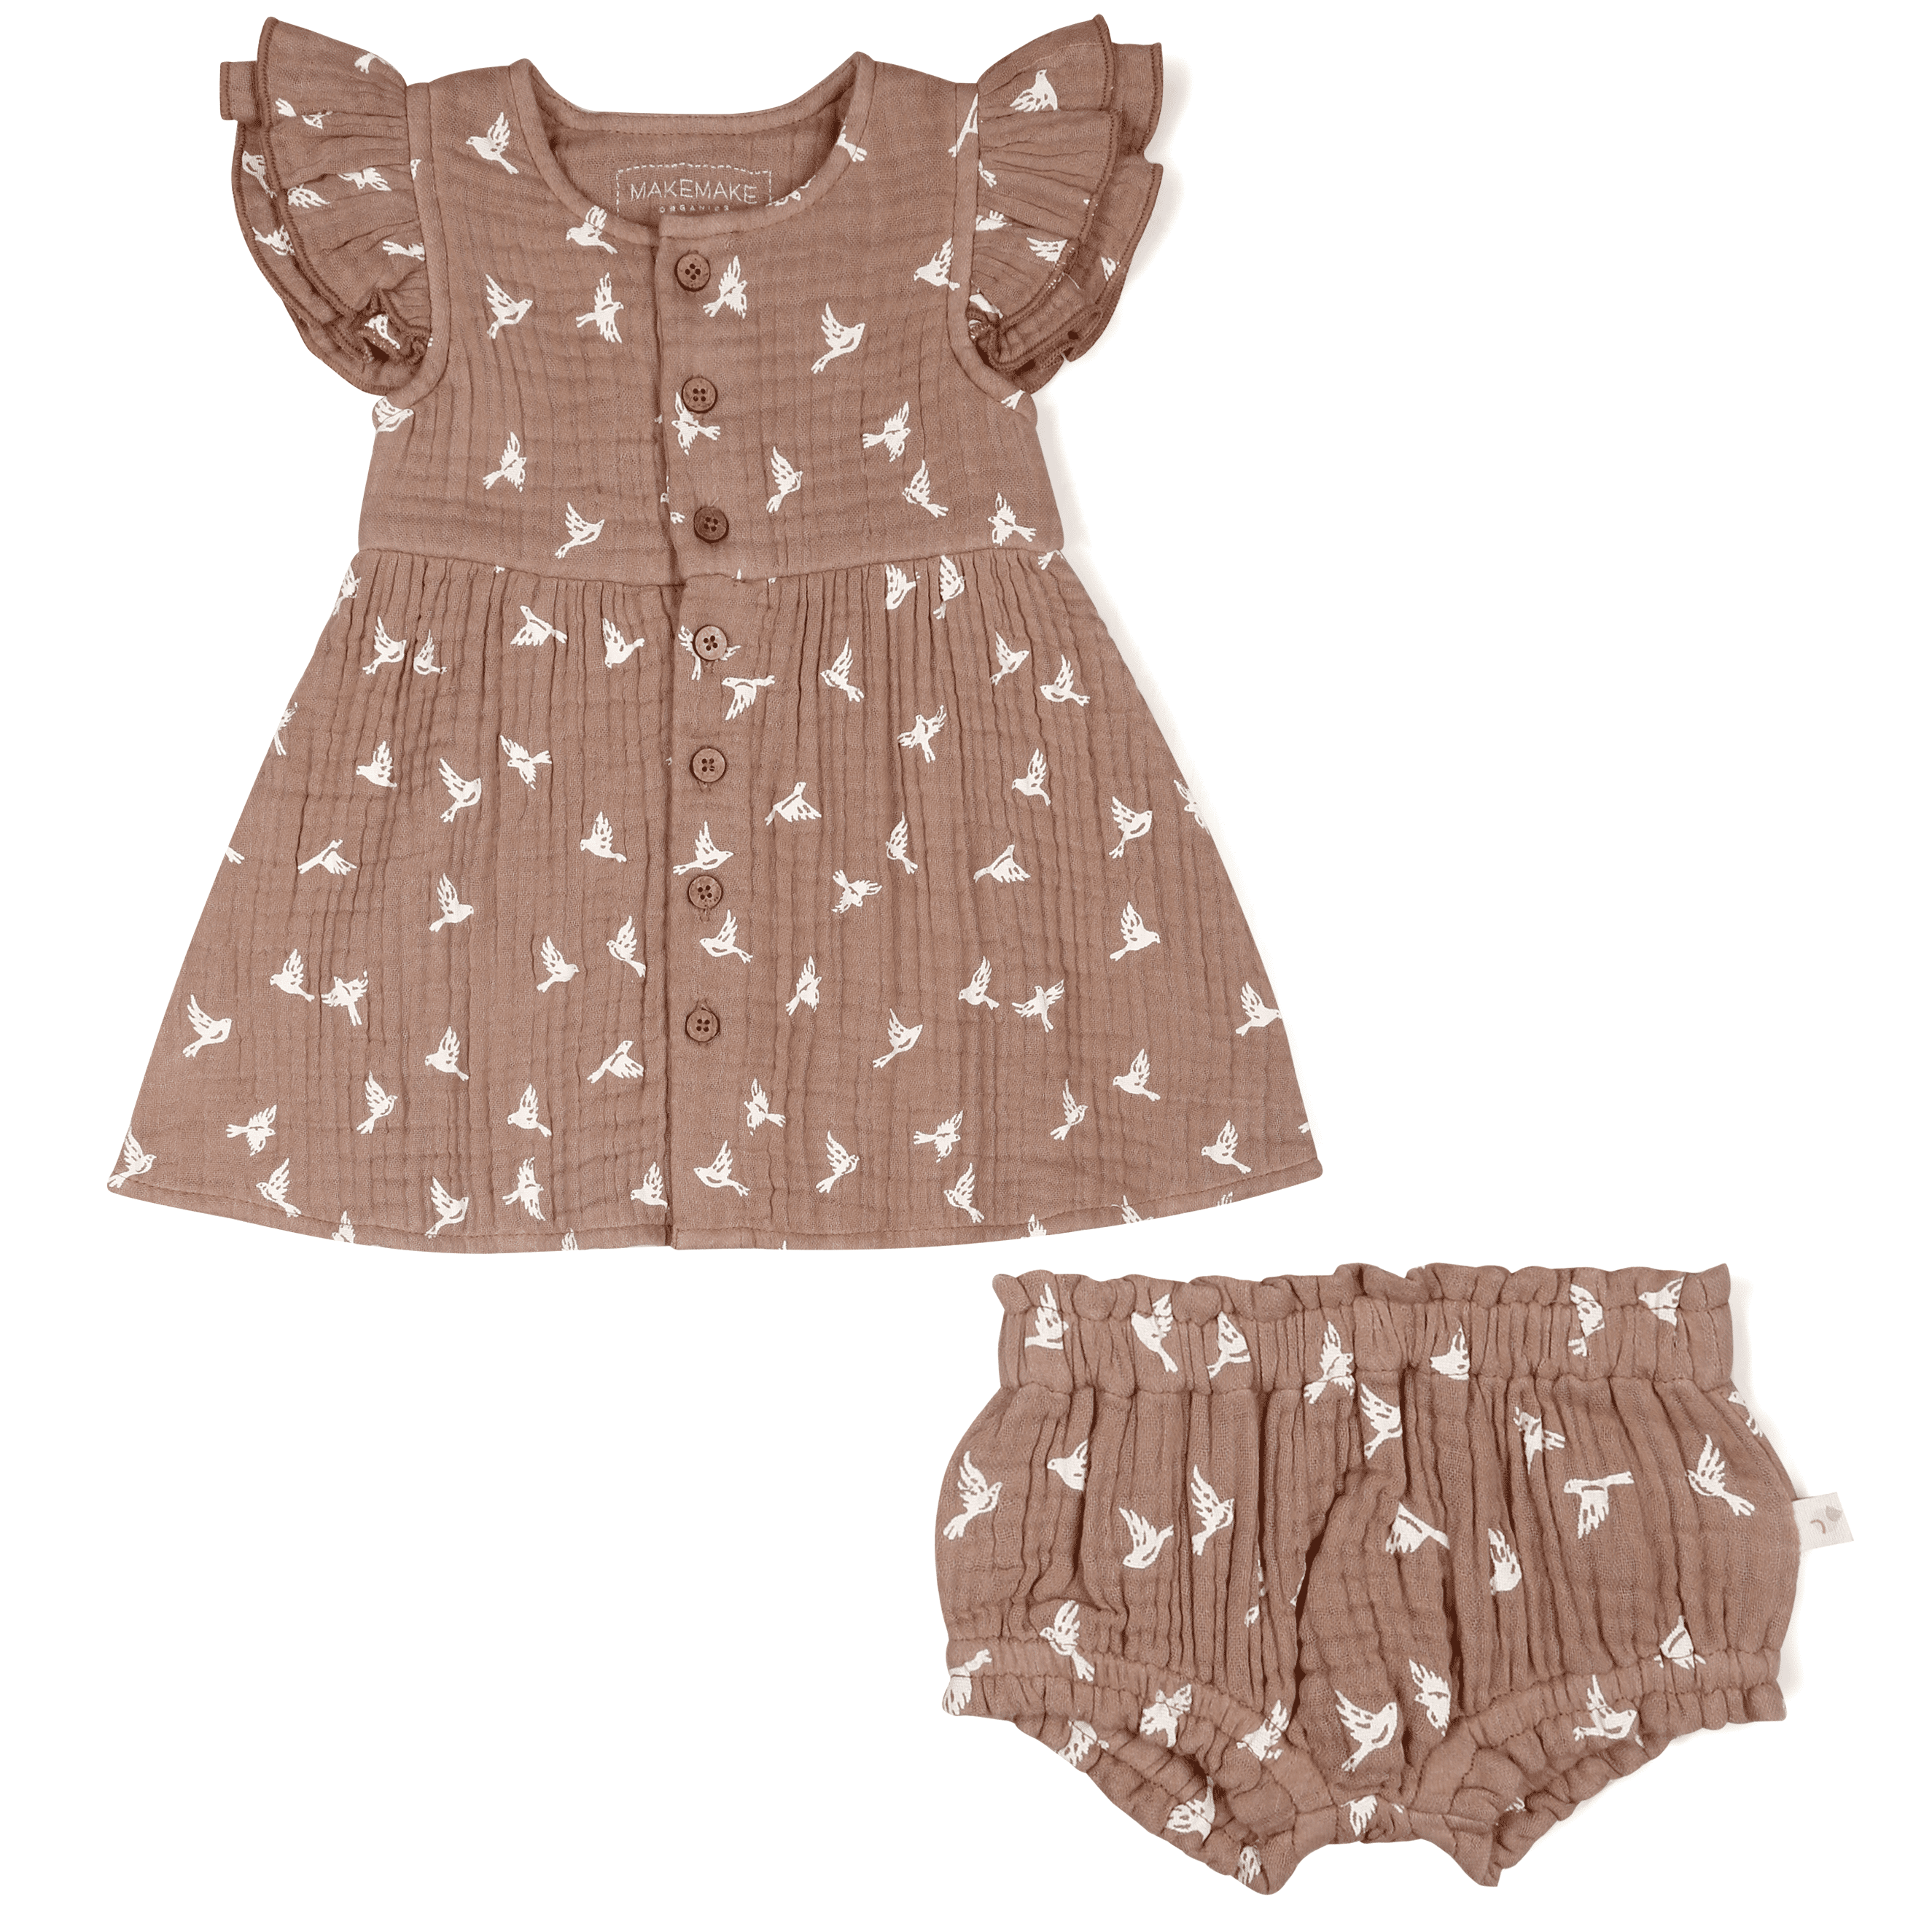 An Organic Muslin Button Flutter Dress - Flock toddler girl's dress and matching bloomers set, adorned with a white dove print. The dress features capped, ruffle sleeves and front buttons by Makemake Organics.